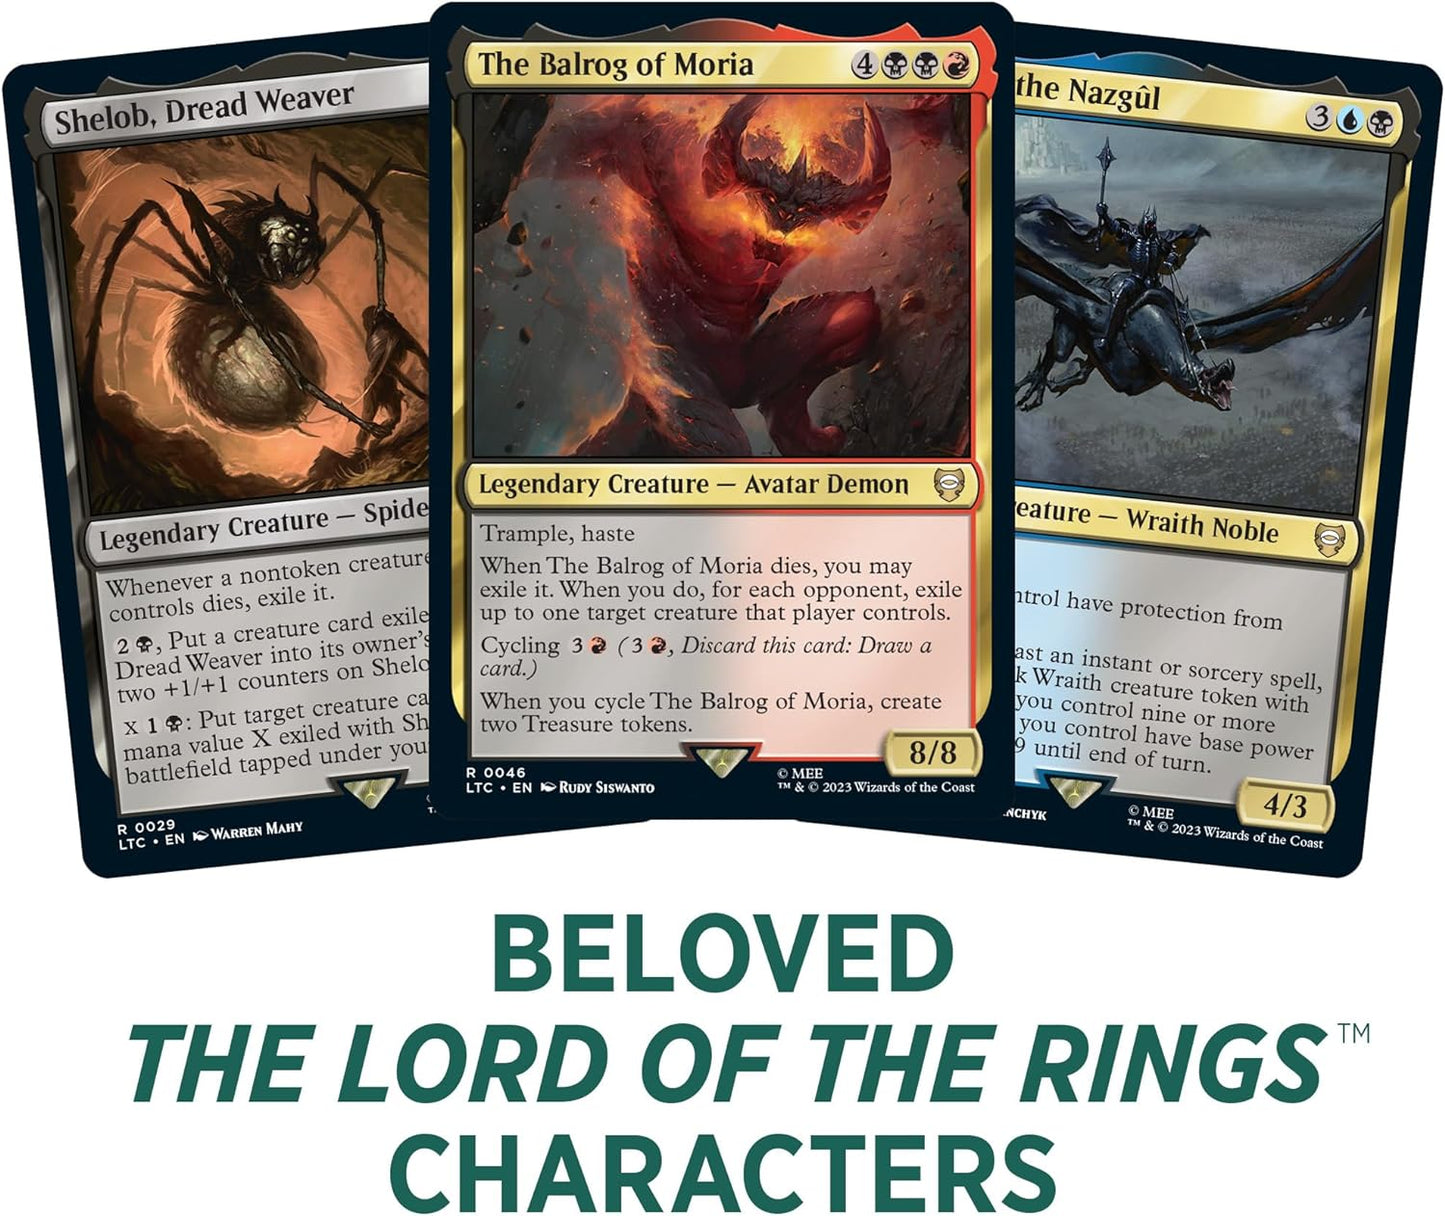 The Lord of the Rings :Tales of Middle-Earth Commander Deck - The Hosts Of Mordor - Sauron, Lord of the Rings